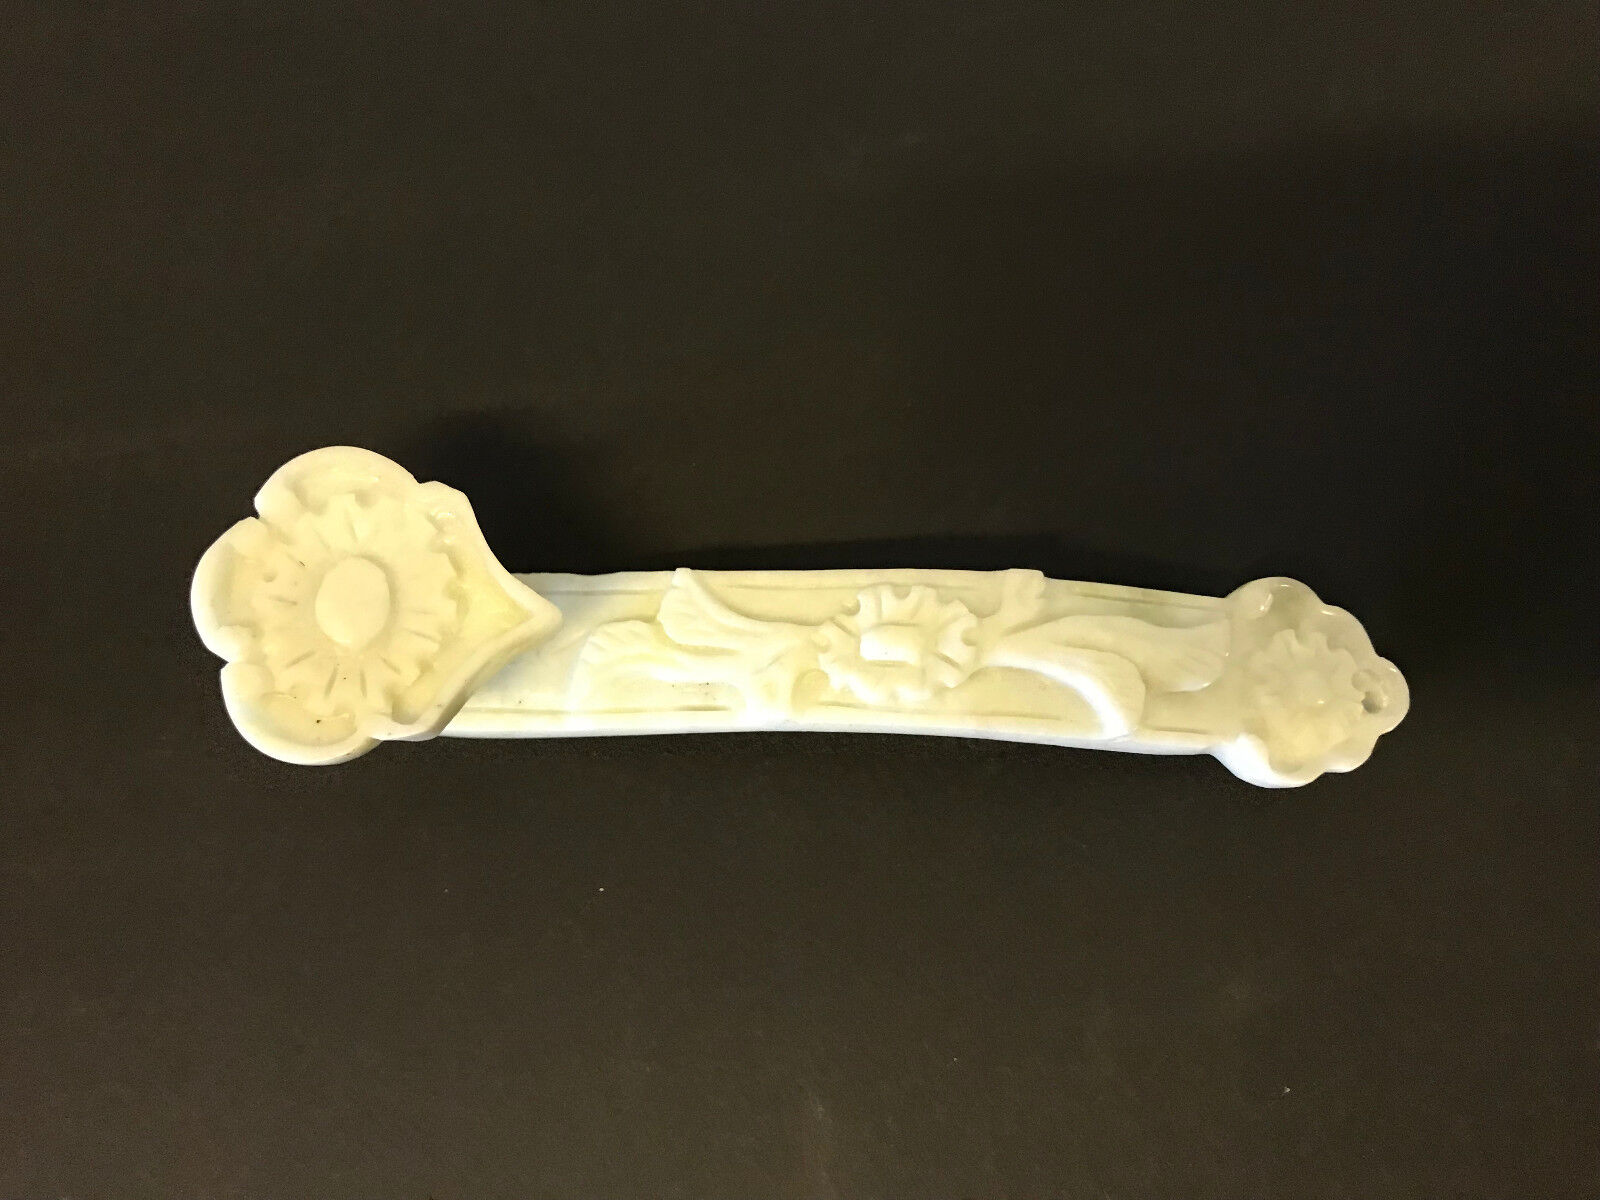 Vintage Chinese Hetian or White Nephrite Jade Ruyi Scepter Carving Floral Dec.